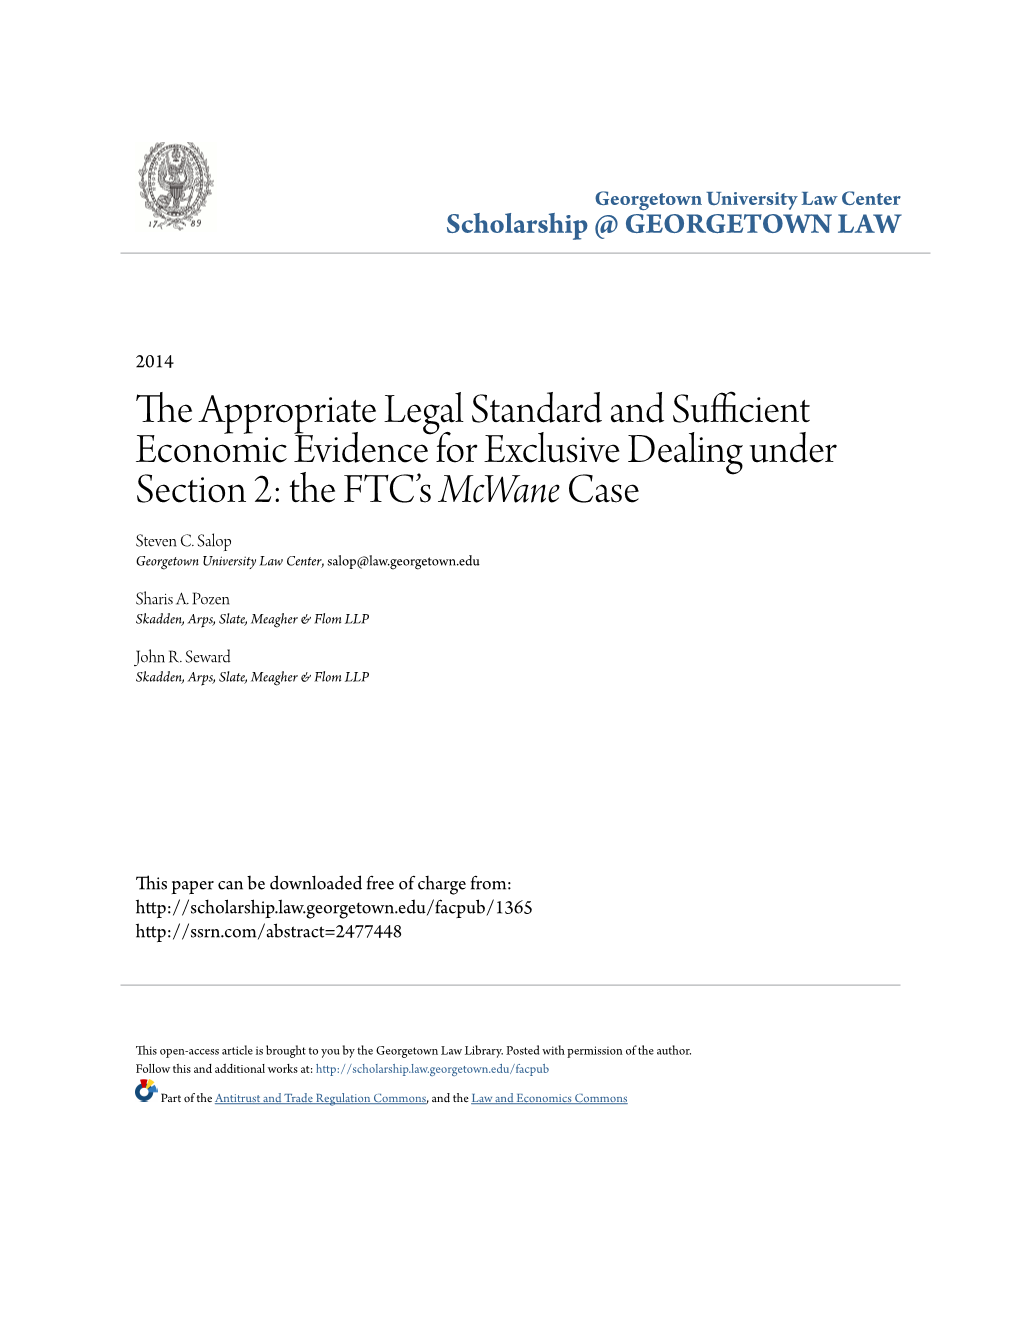 The Appropriate Legal Standard and Sufficient Economic Evidence for Exclusive Dealing Under Section 2: the FTC’S Mcwane Case Steven C